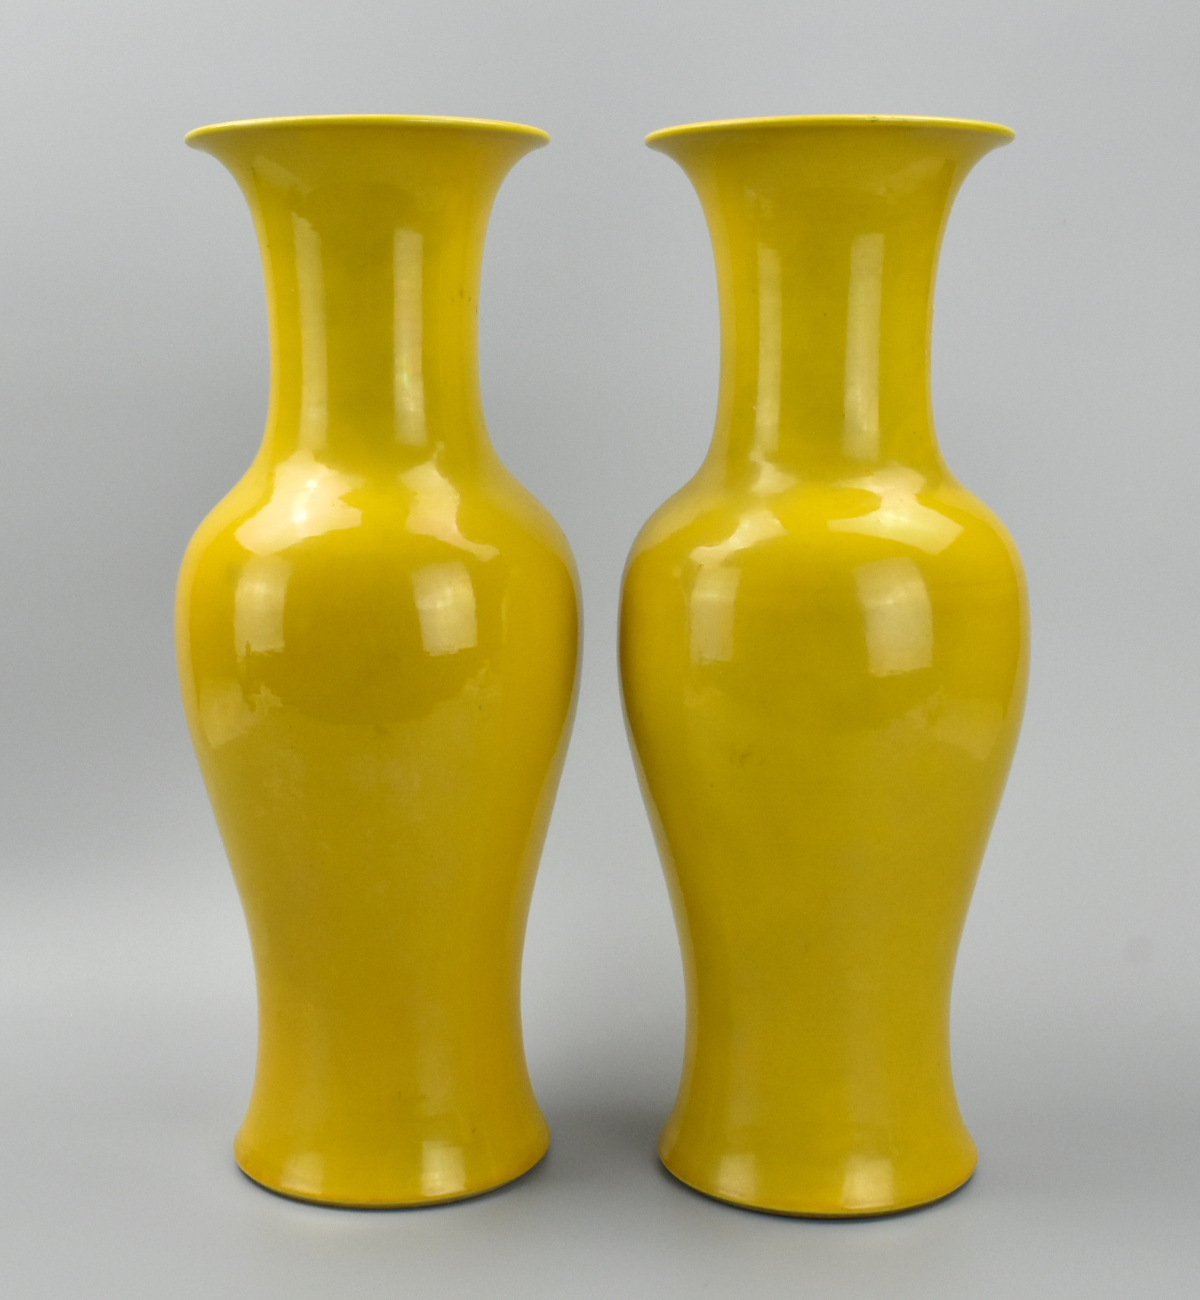 PAIR OF CHINESE YELLOW GLAZED VASES,19T-20H